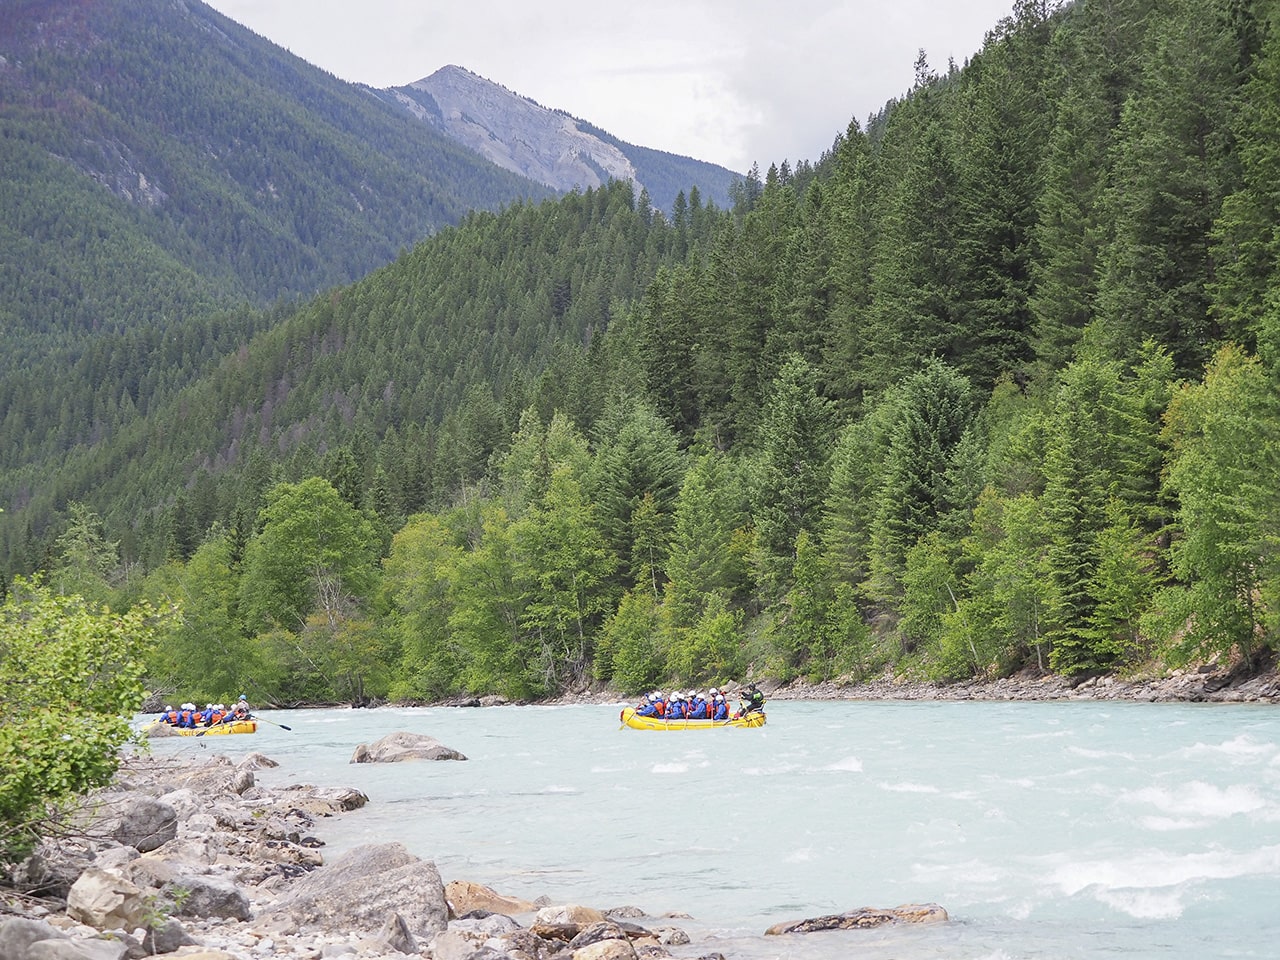 Two boats rafting down the Kicking Horse River on a grey drizzly day.